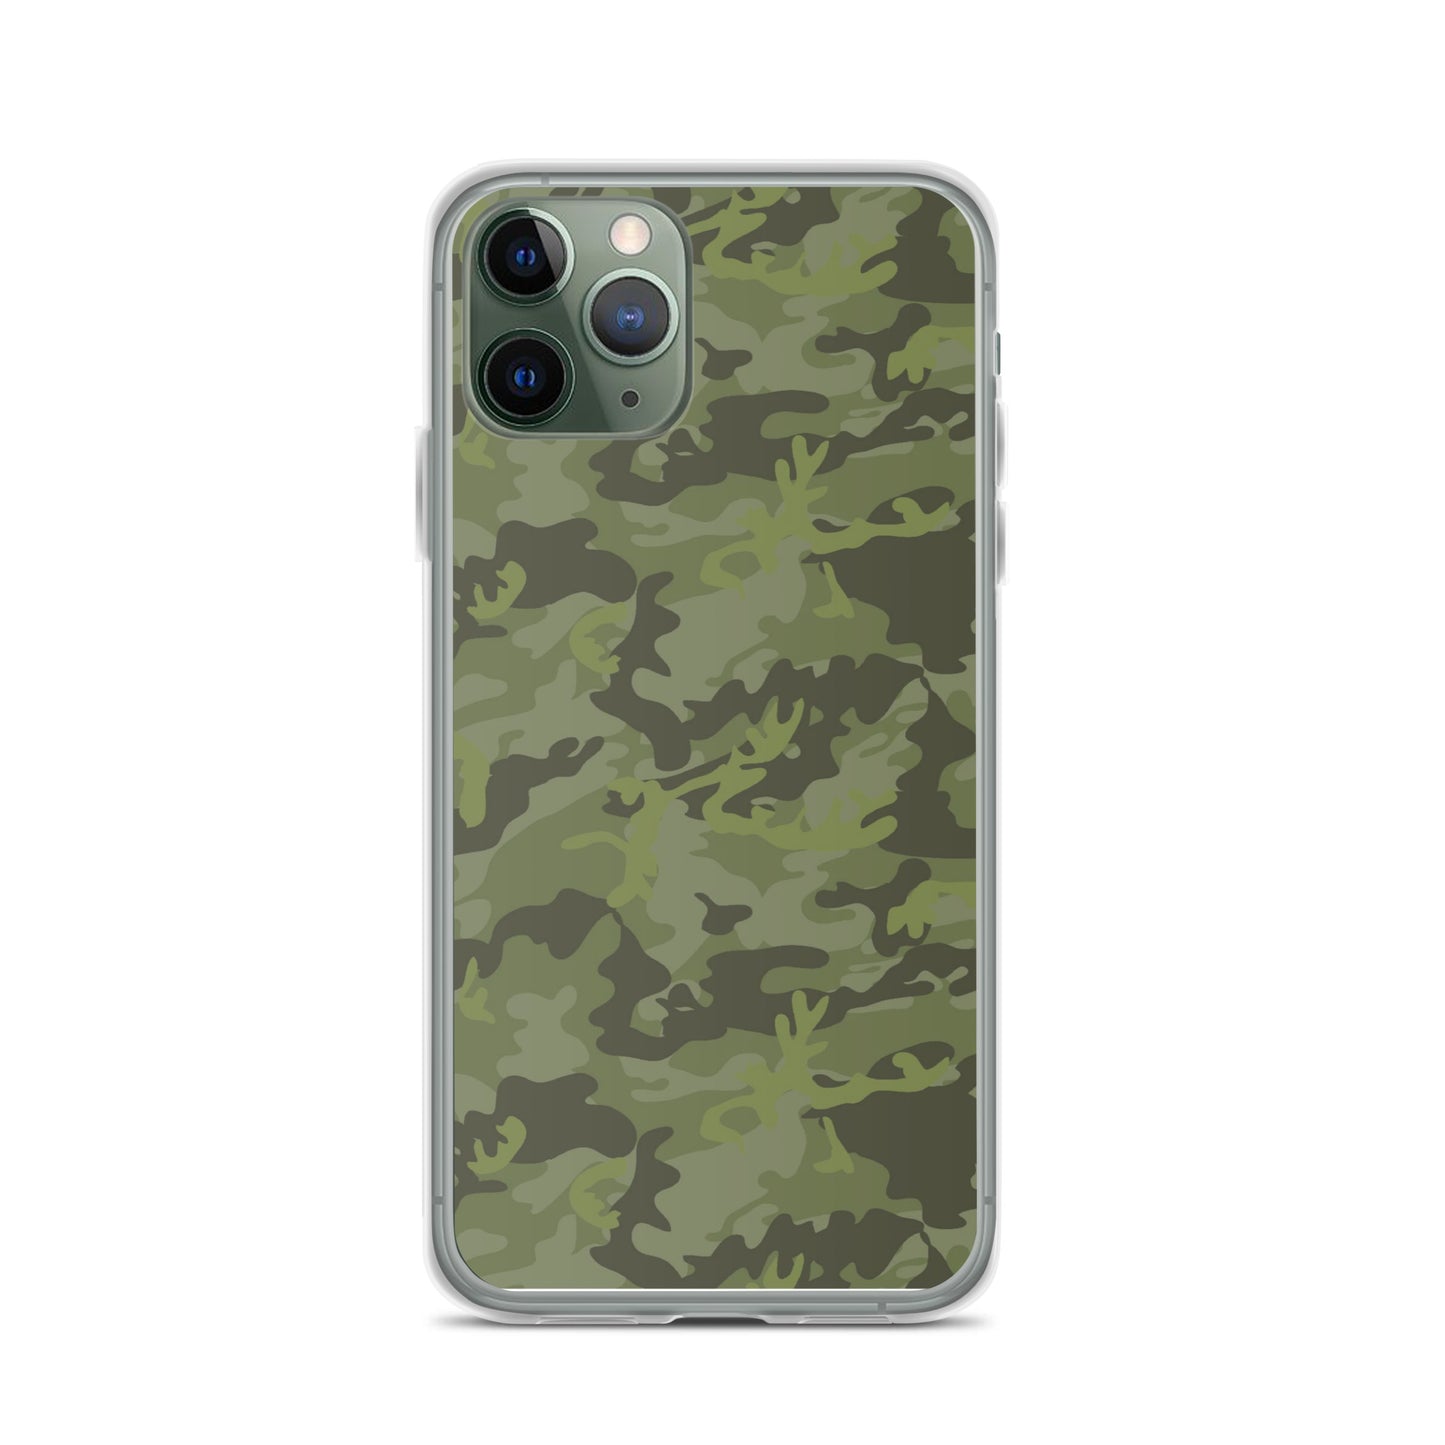 Swamp Veil - Clear Case for iPhone